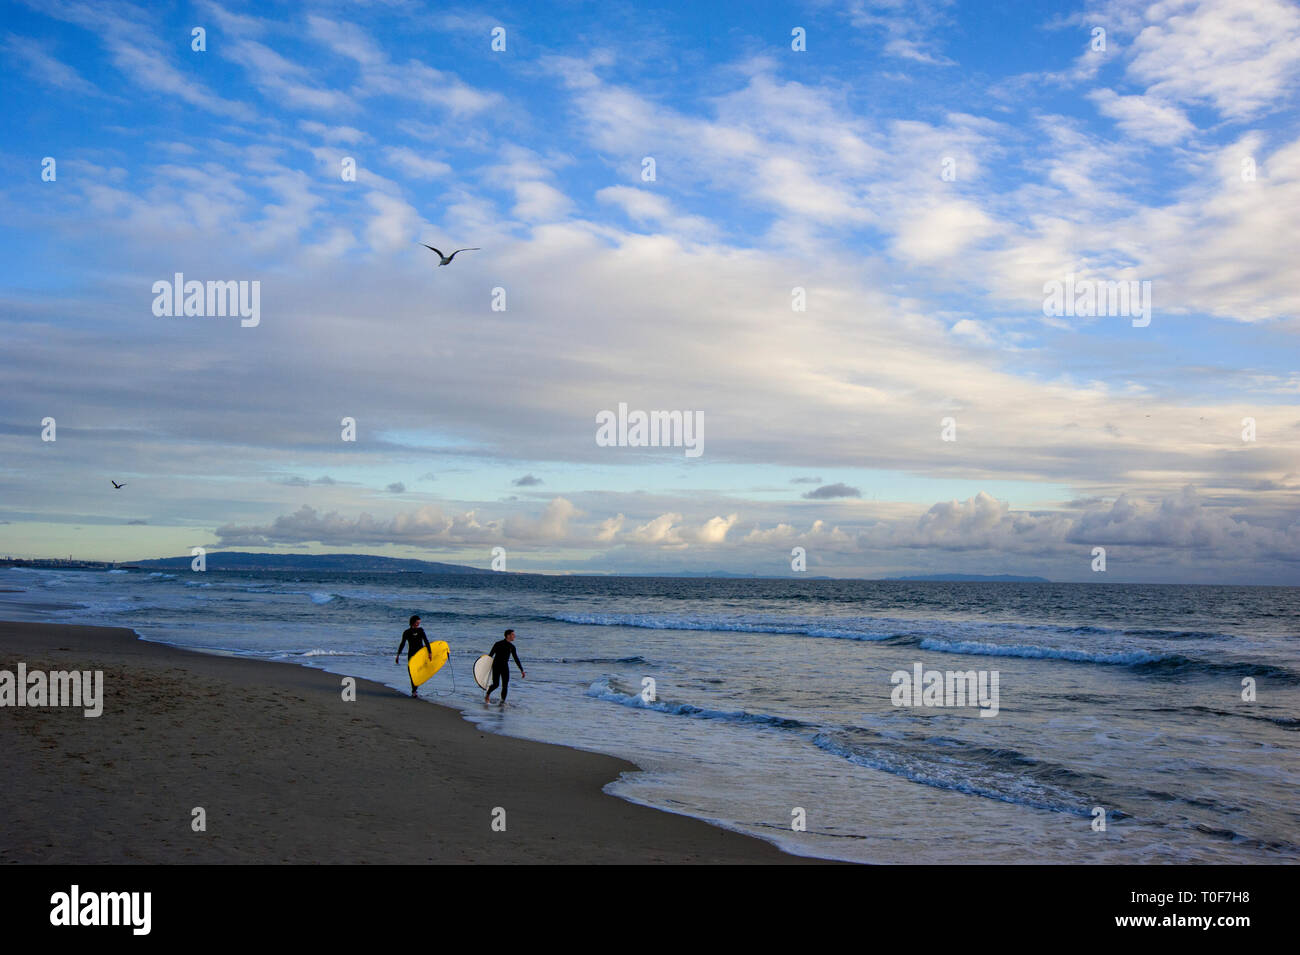 Surfers on Santa Monica beach with the Palos Verdes peninsula in the background Stock Photo